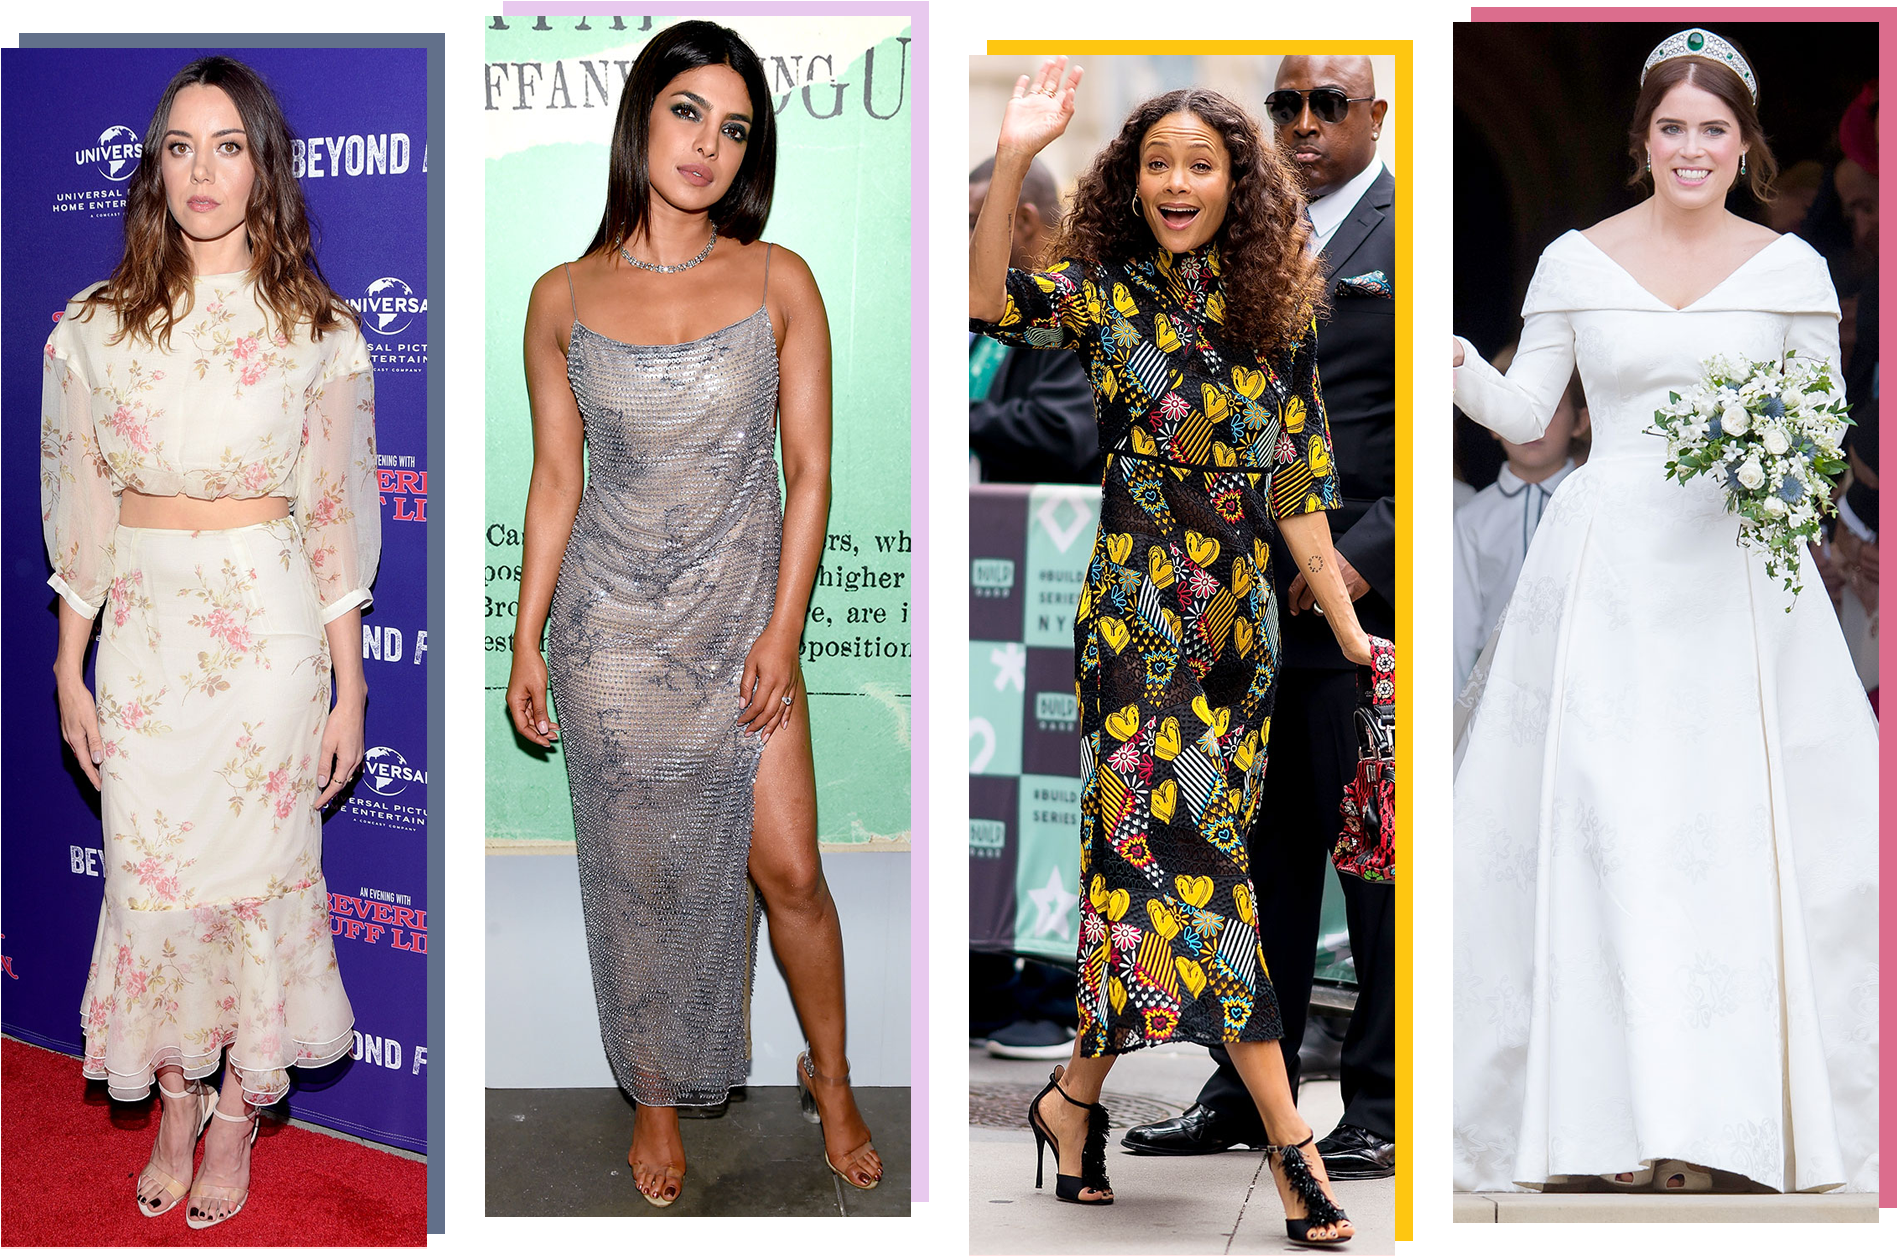 Four Women Red Carpet Events PNG image